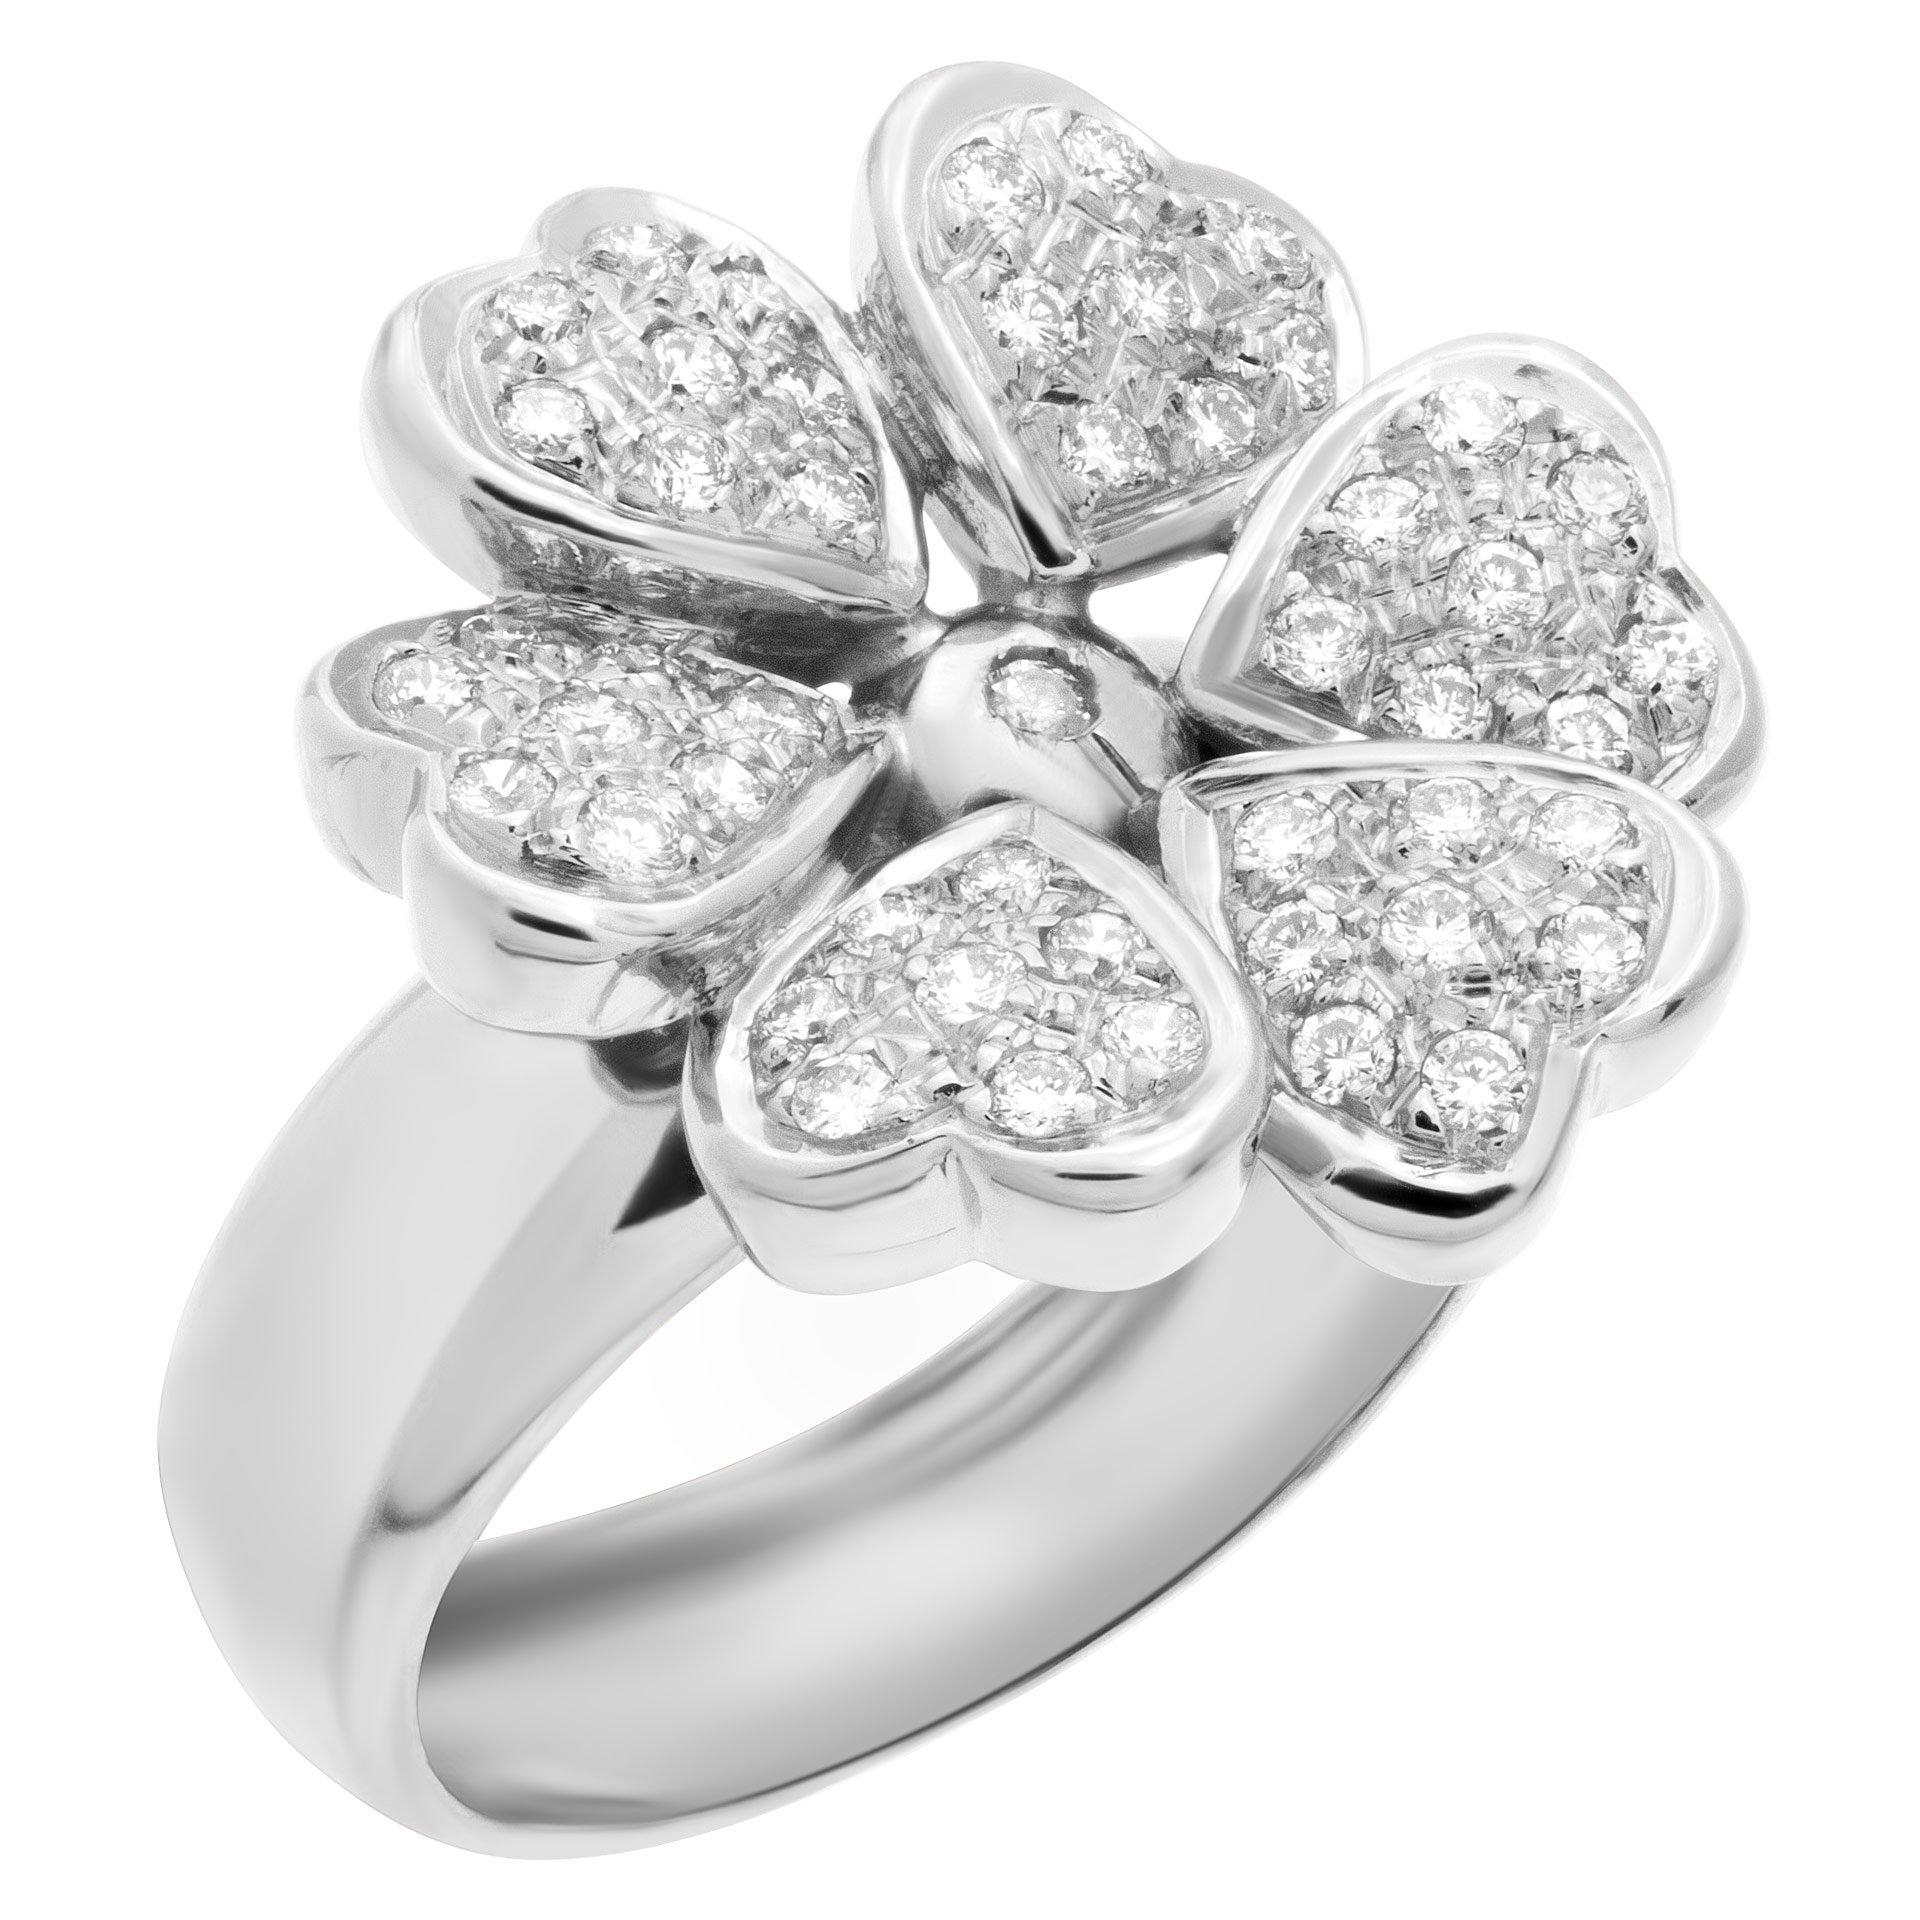 Diamond Flower ring with 0.60 carat in G-H color, VS clarity diamonds set in 18k white gold. Size 6.5

This Diamond ring is currently size 6.5 and some items can be sized up or down, please ask! It weighs 6.2 pennyweights and is 18k White Gold.